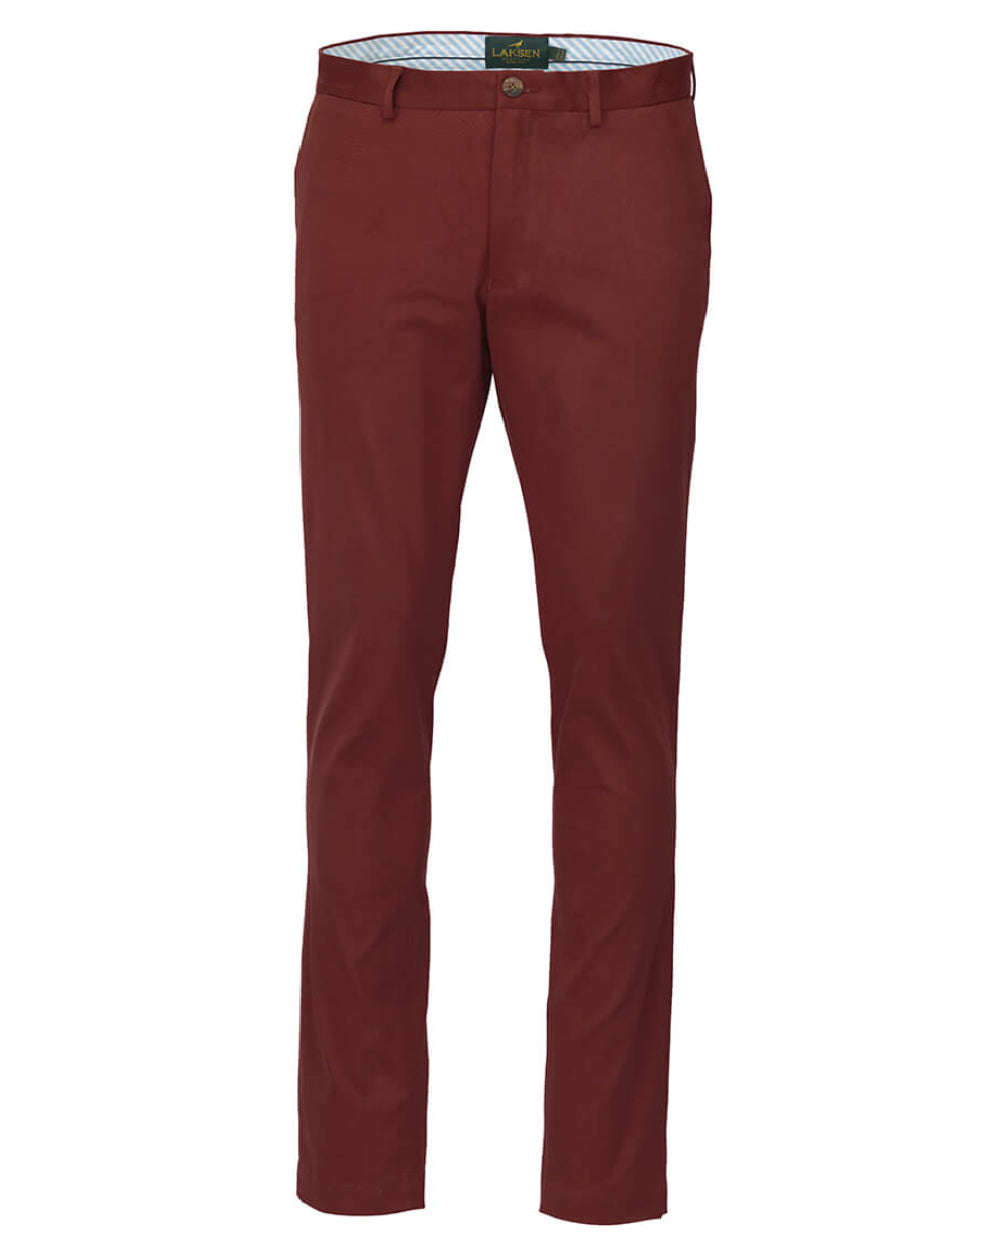 Wine Coloured Laksen Lumley Chino Trousers On A White Background 